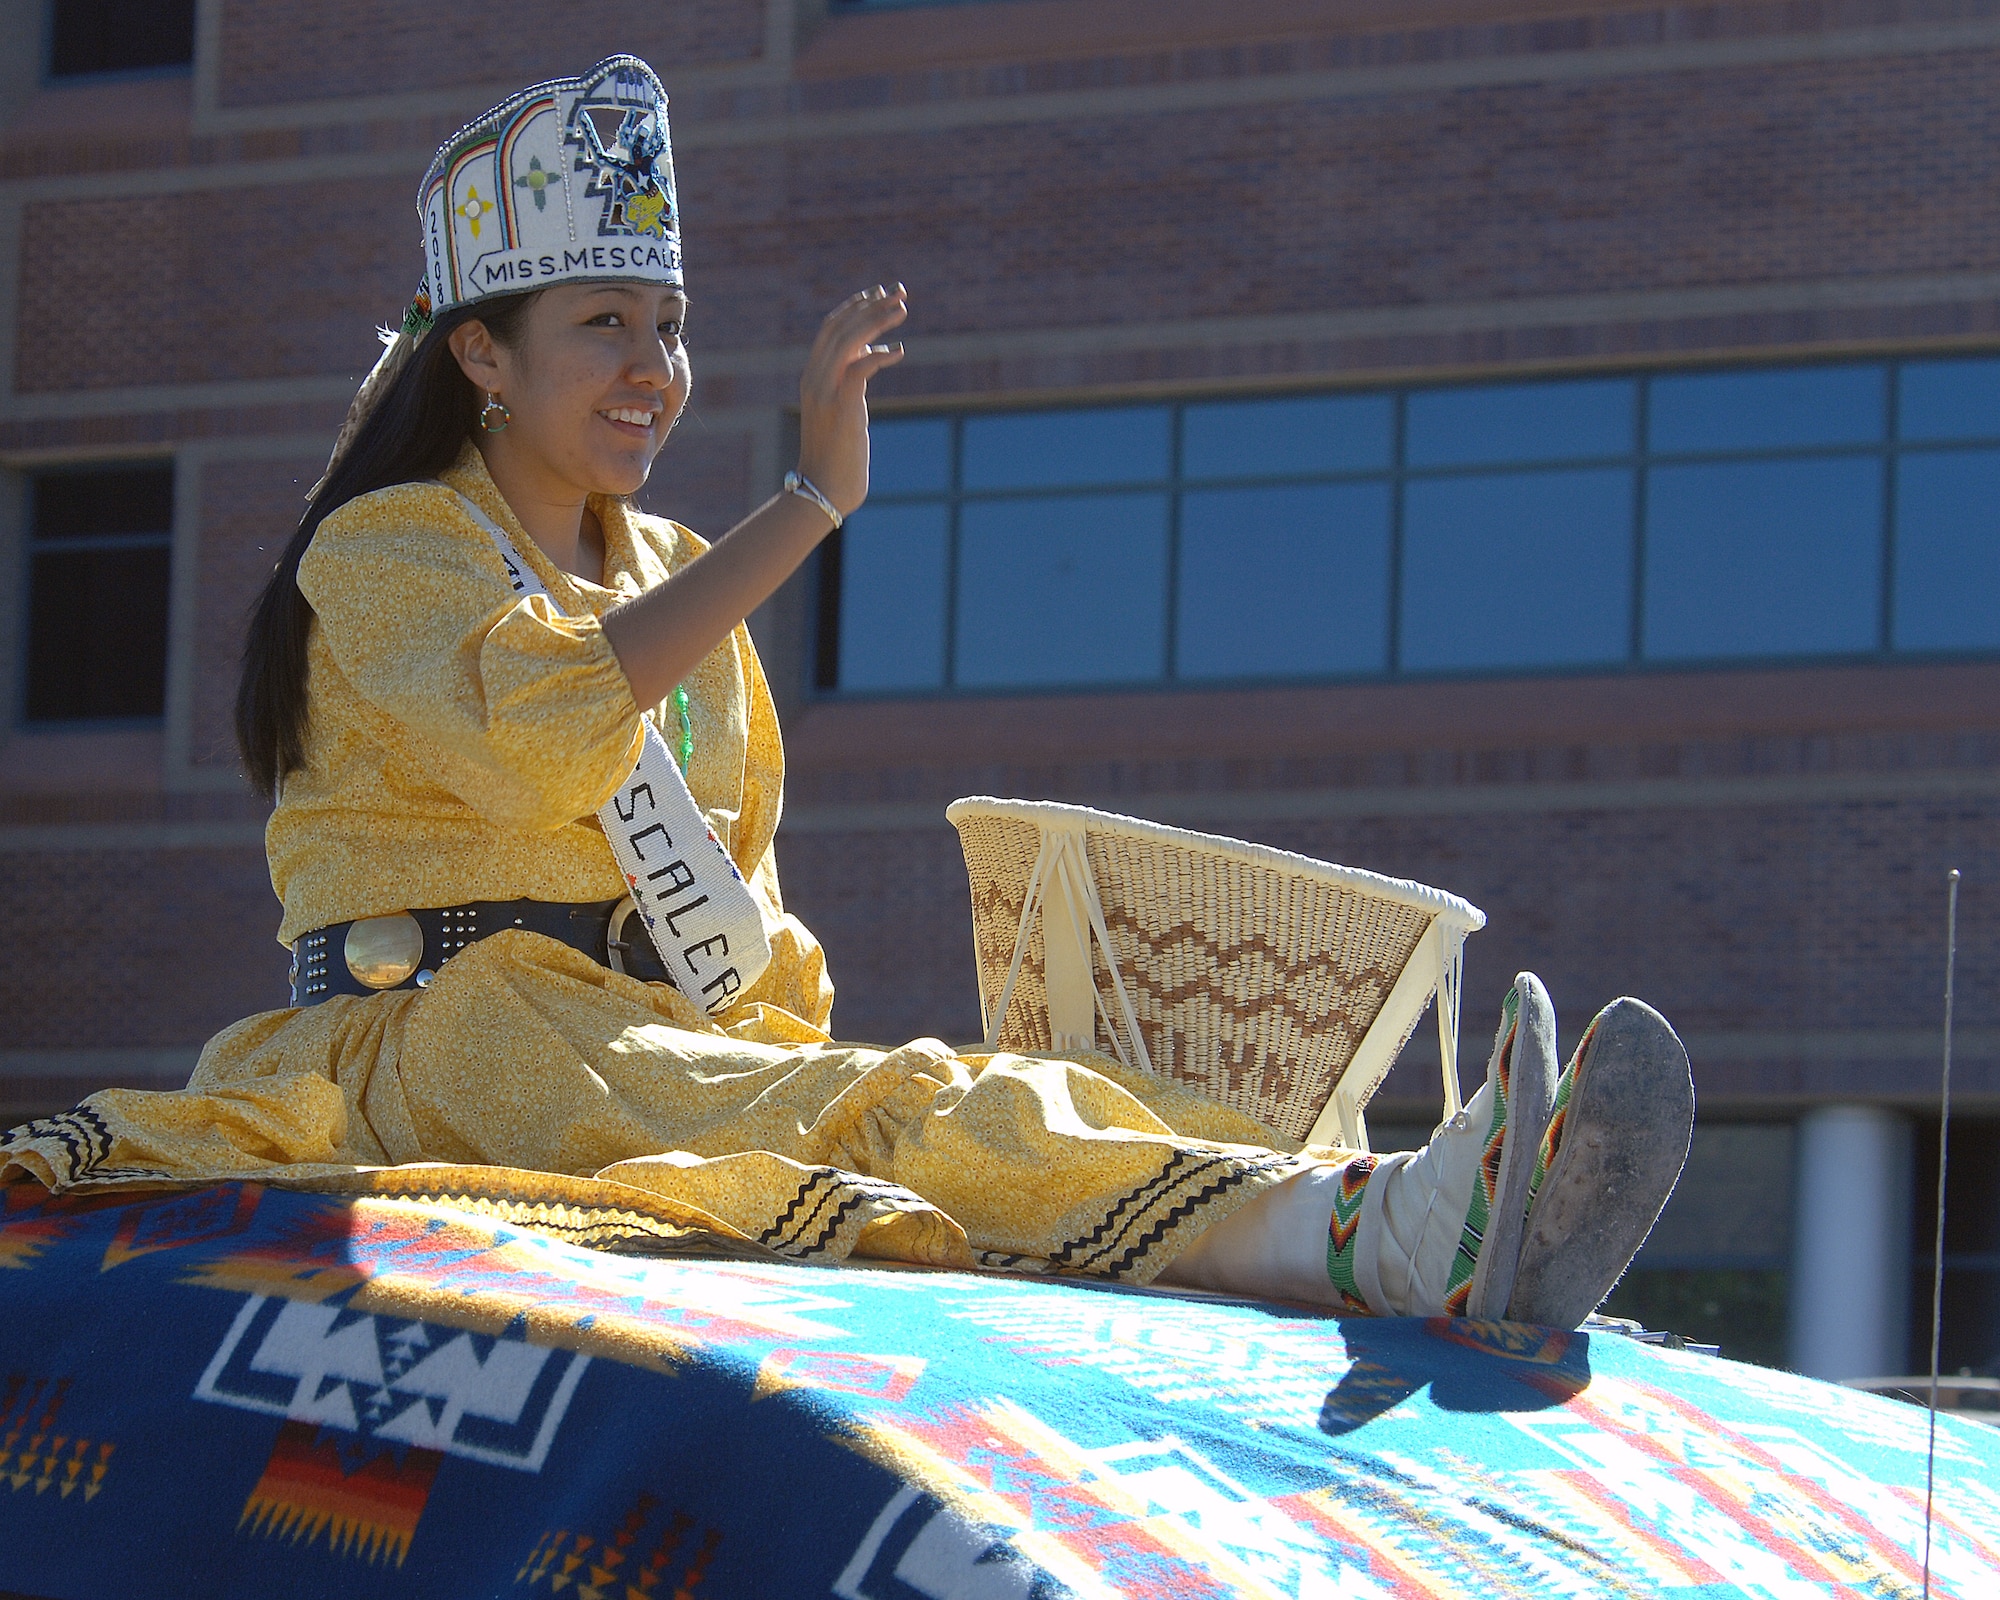 Miss Mescalero rides on top of a vechicle during the Veterans Day parade, Nov. 8, in Alamogordo, N.M.The Veterans Day National Ceremony is held Nov. 11 each year at Arlington National Cemetery. A color guard made up of members from each of the military services, renders honors to America's war dead during a tradition-rich ceremony at the Tomb of the Unkowns.



(U.S. Air Force photo/ Senior Airman Anthony Nelson)
